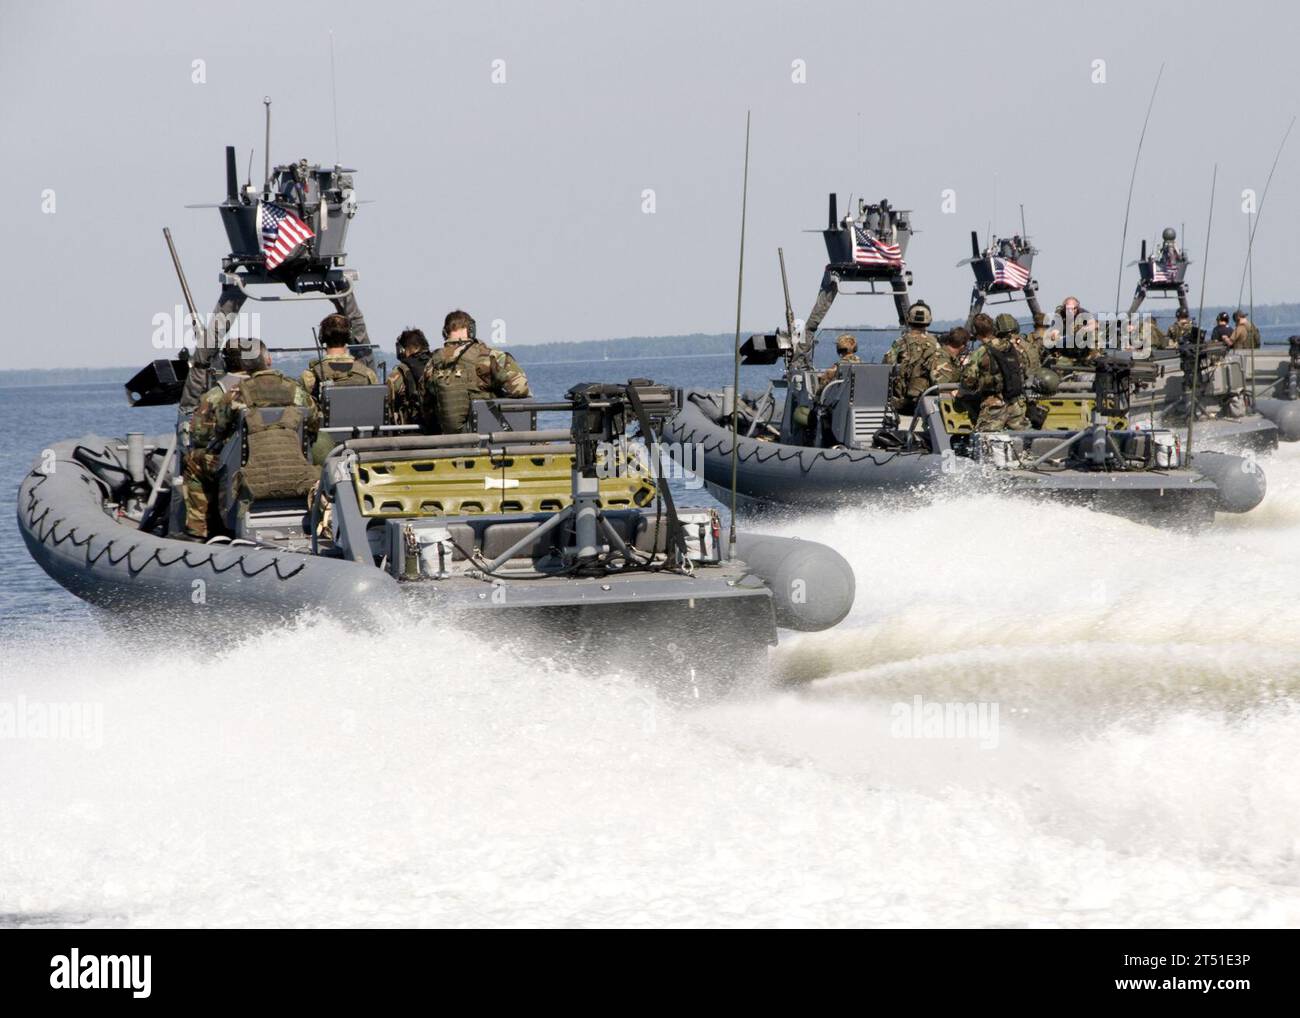 0809034500G-090 PINEY ISLAND, N.C. (Sept. 3, 2008) Naval Special Warfare 11-meter rigid-hull inflatable boats (RHIB) transit the Pamlico Sound to a live-fire training range near Piney Island. The Special Warfare Combatant-craft Crewmen who operate the 11-meter RHIBS fired .50-caliber machine guns and MK-19 grenade launchers as part of a training exercise preparing for an upcoming deployment supporting the Global War on Terror. Navy Stock Photo